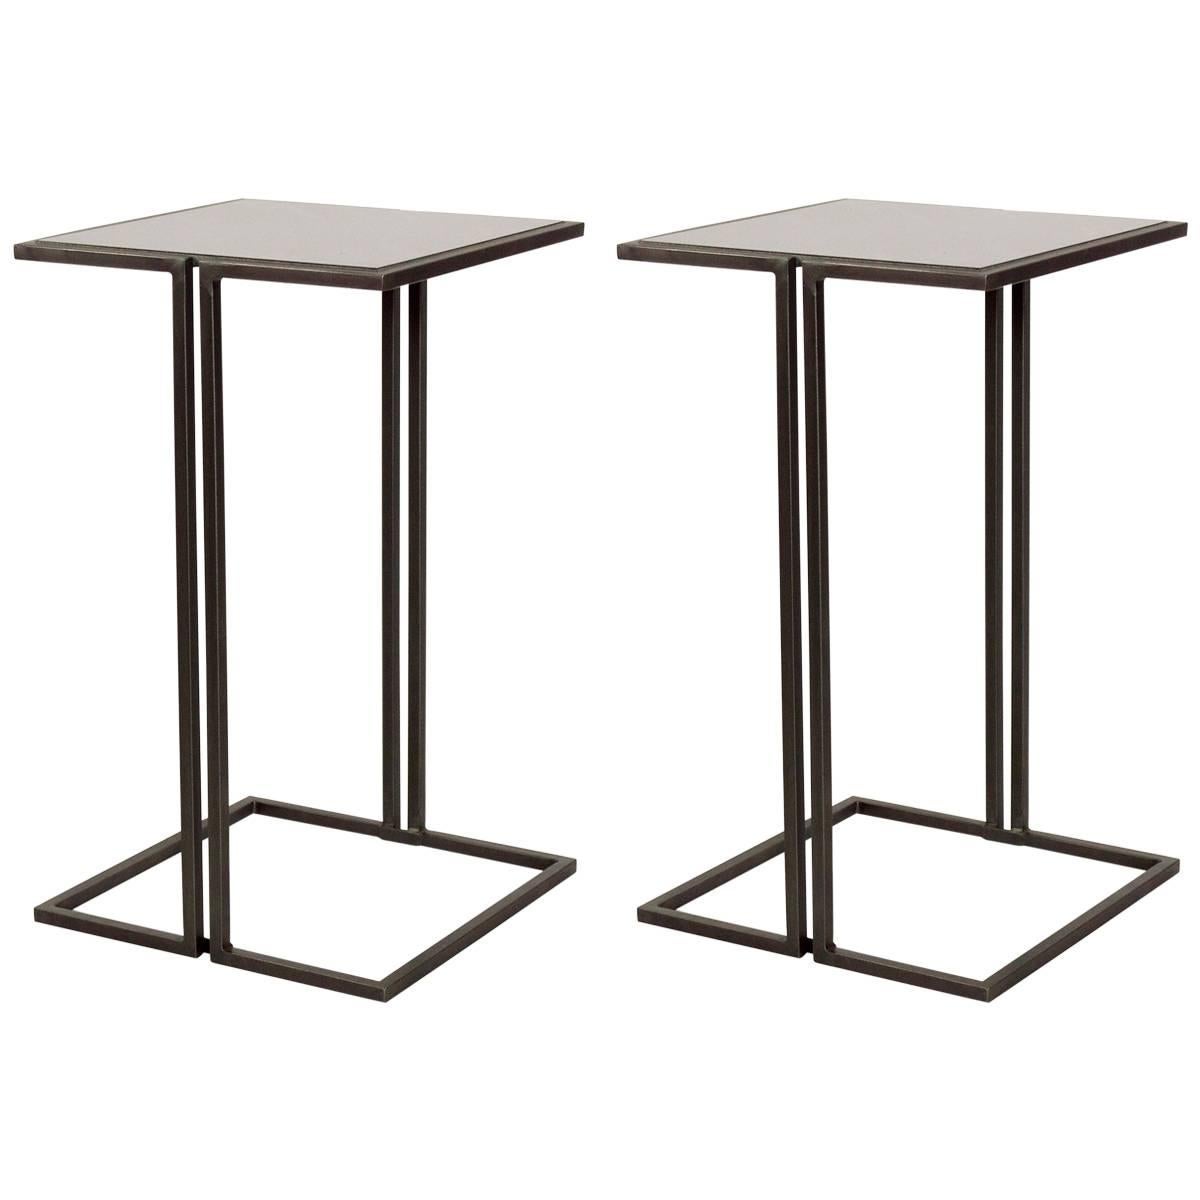 Pair of Nantes Side Tables by Bourgeois Boheme Atelier